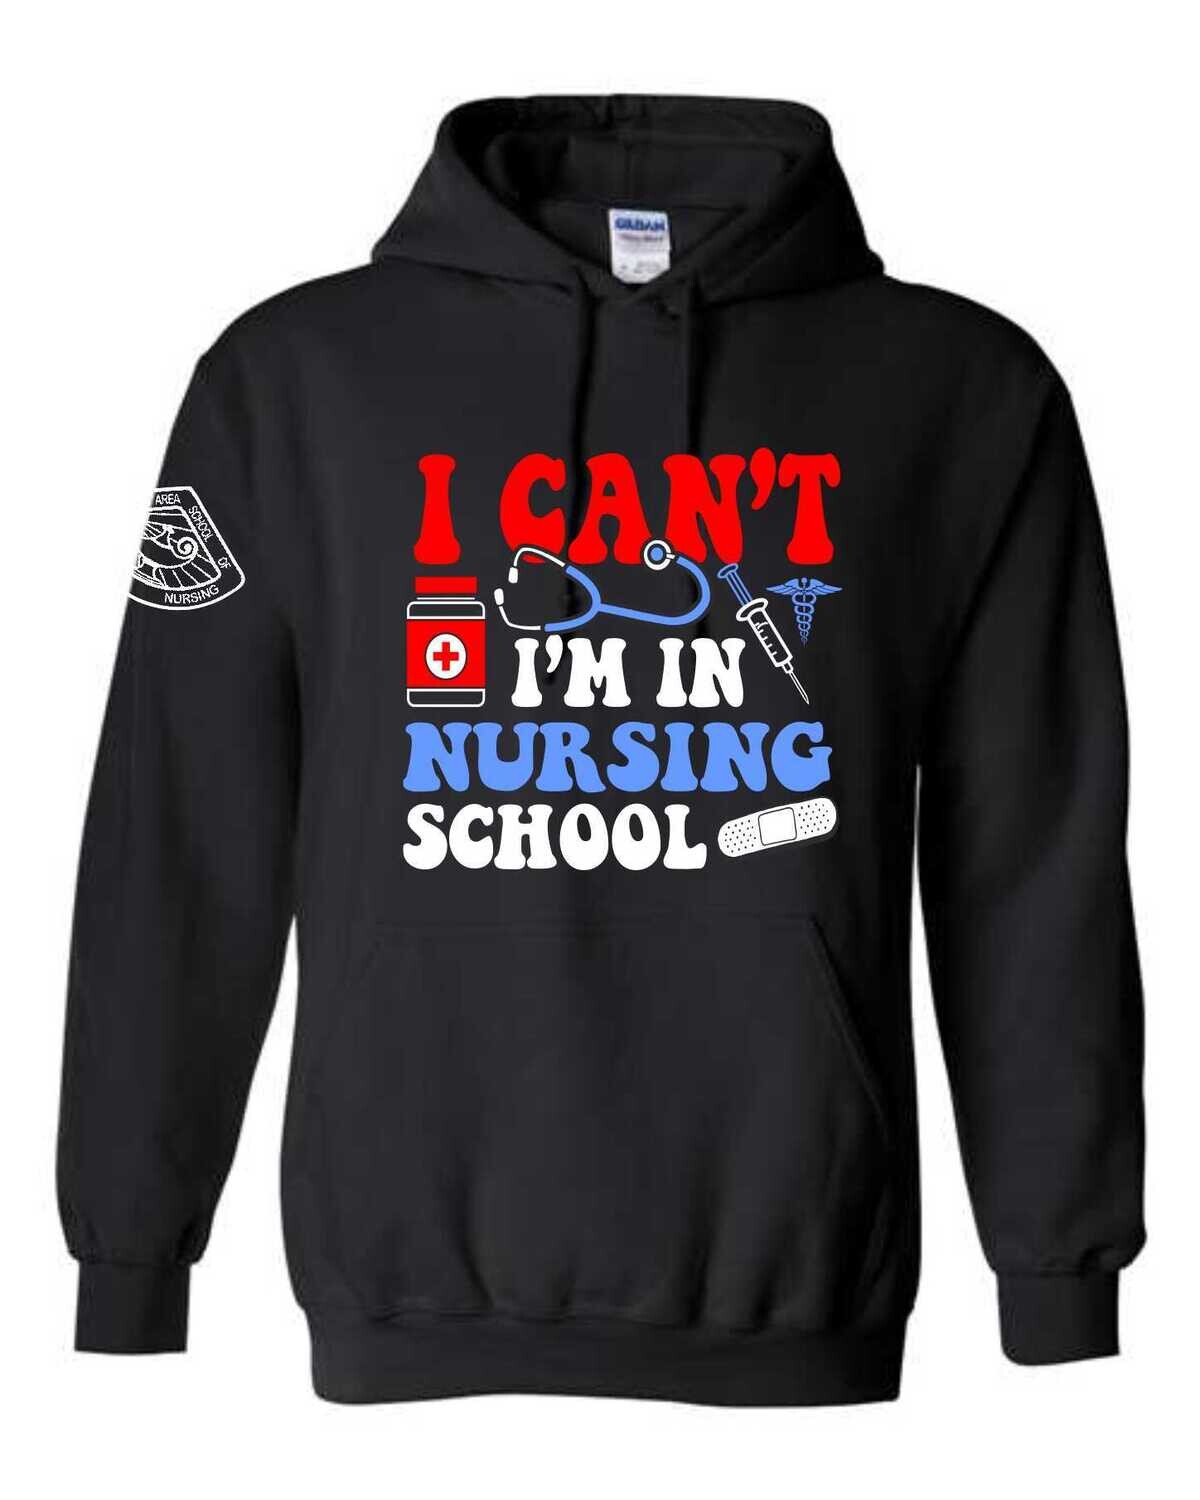 CASPN-18500 BLACK I CAN'T / PULLOVER HOODIE